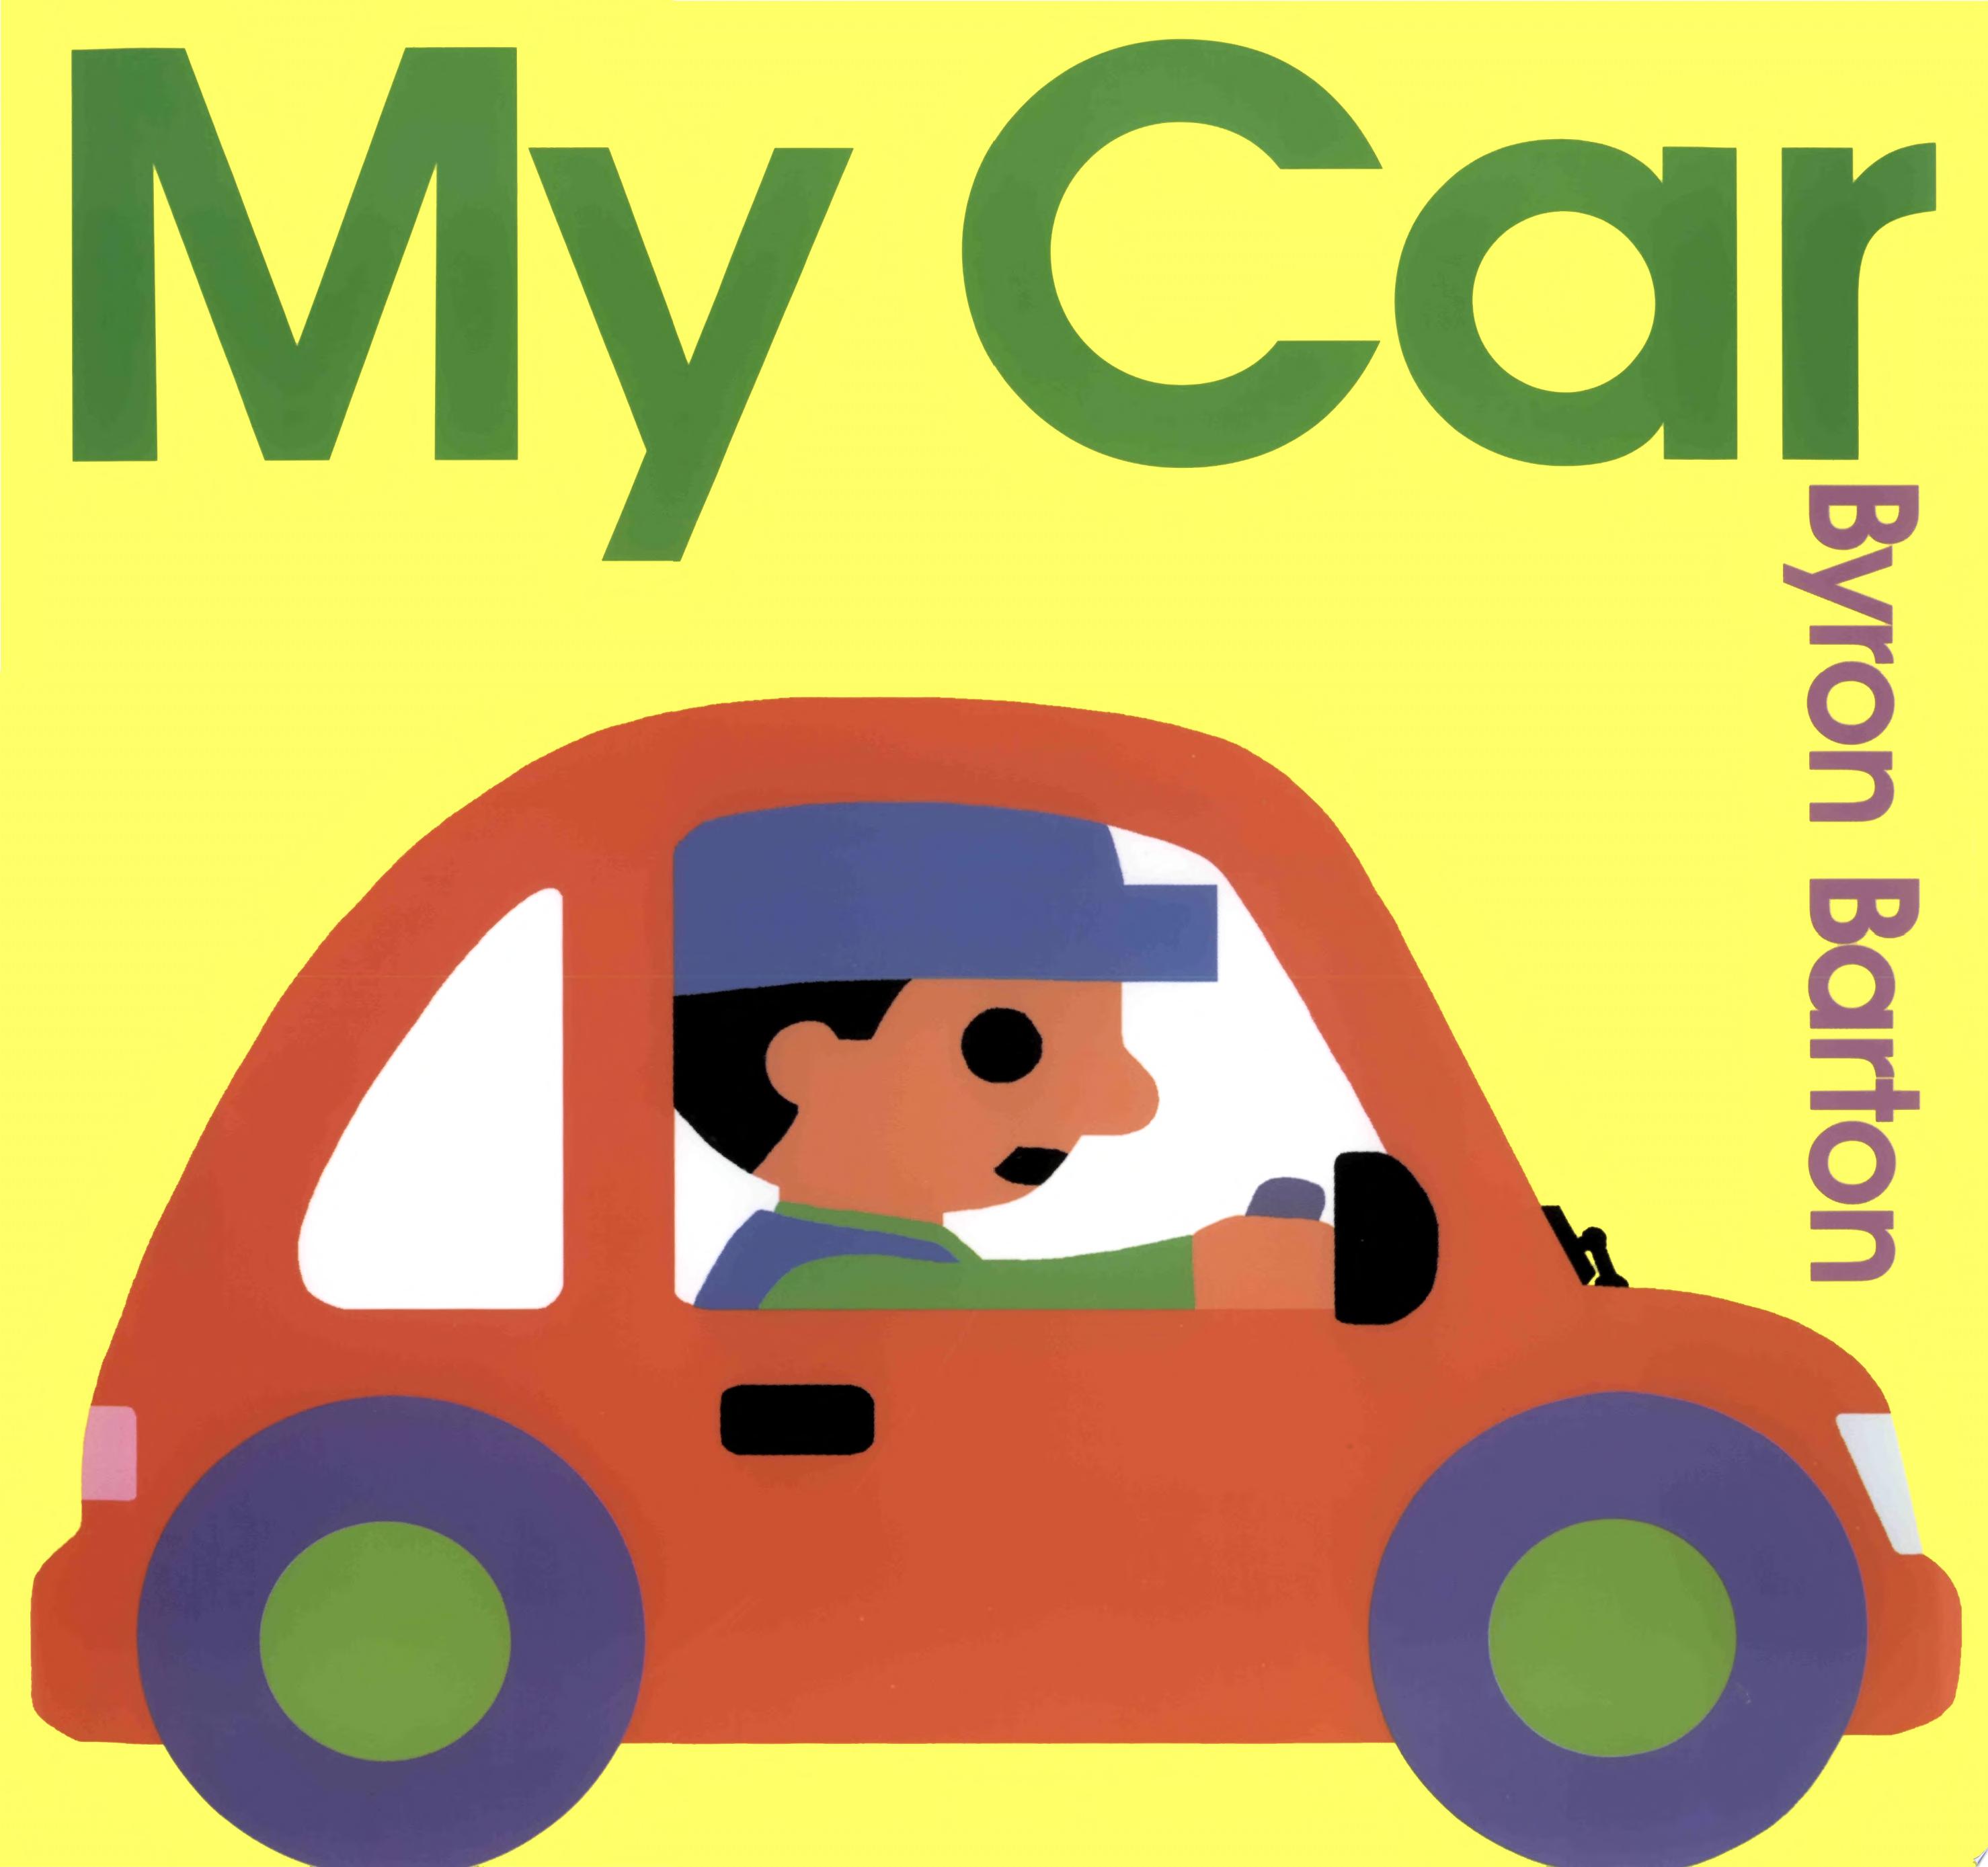 Image for "My Car"